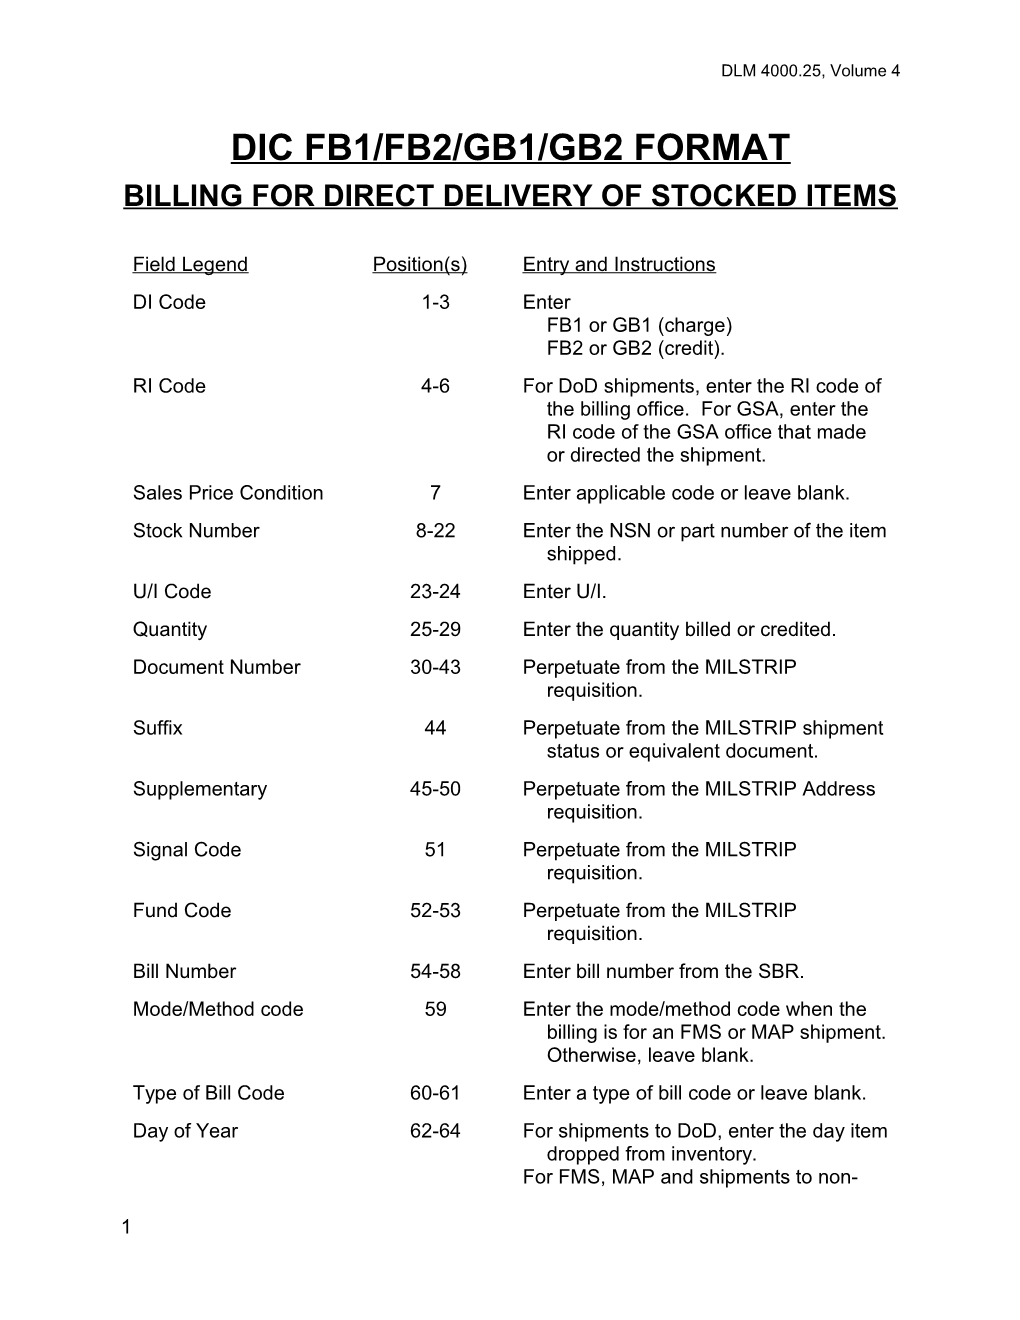 Ap3.4 Billing for Direct Delivery of Stocked Items